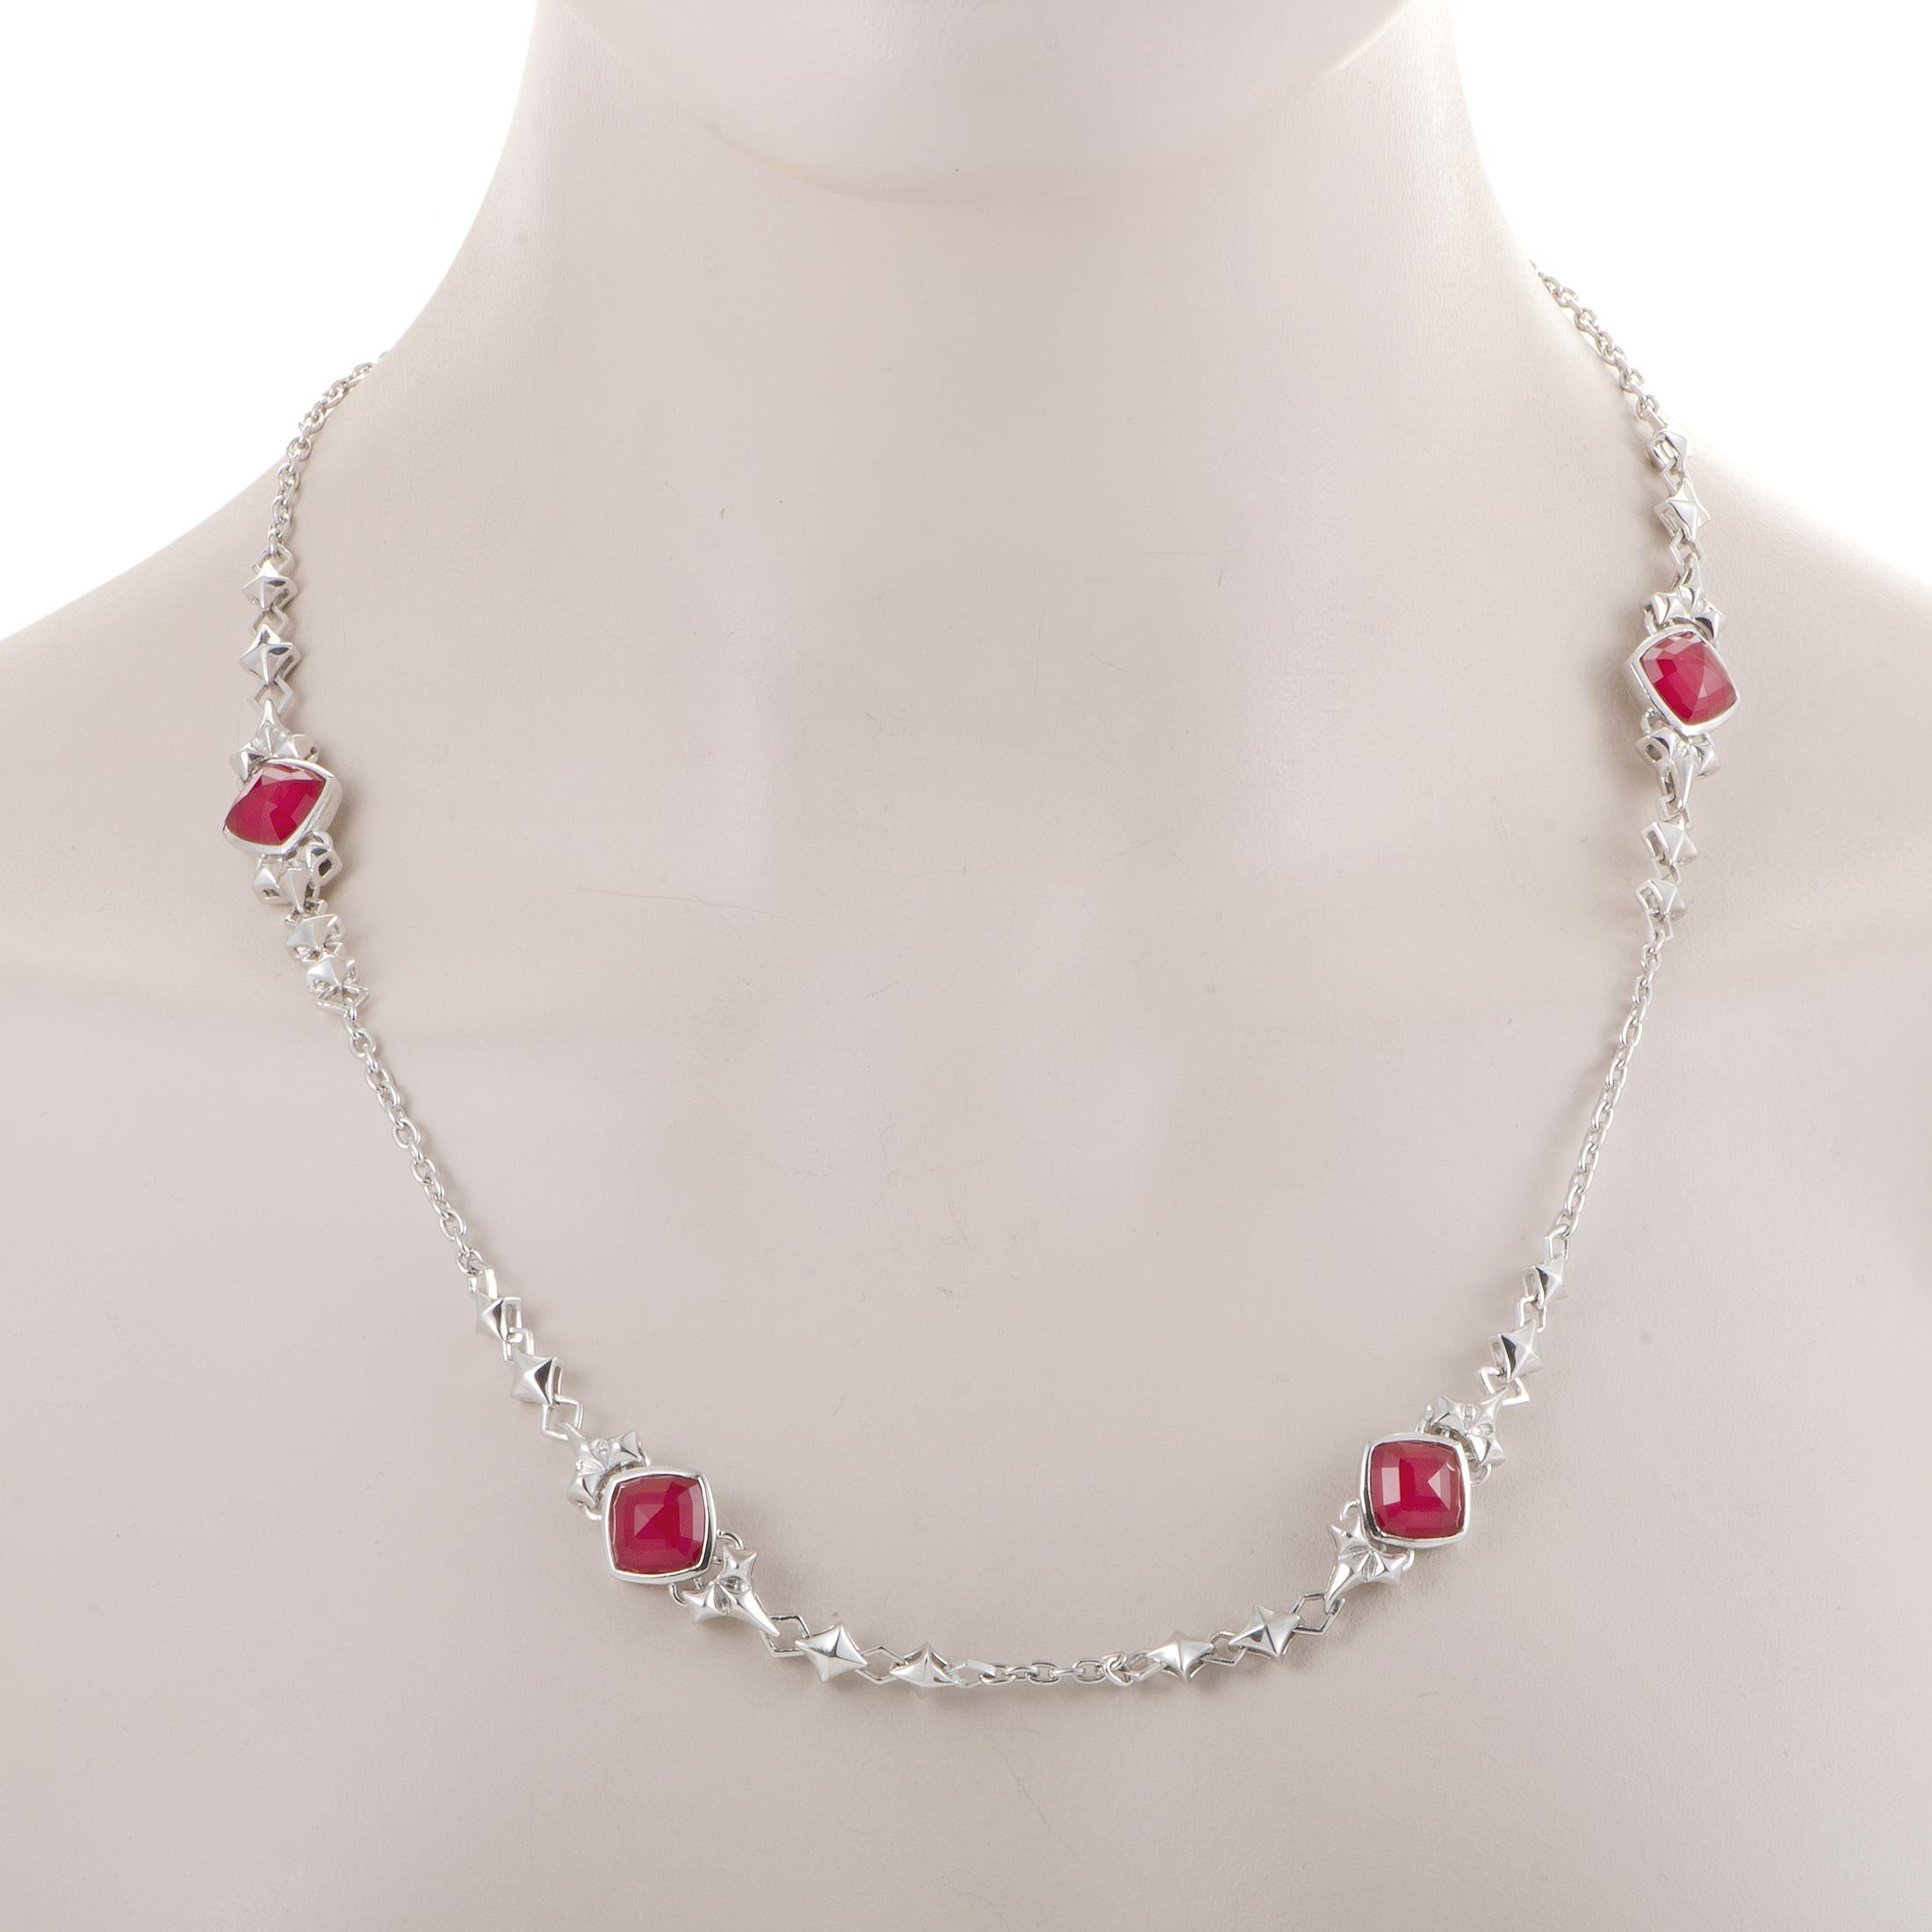 Standing out in brilliant fashion against the wonderfully bright backdrop of white rhodium-plated silver and quartz, the amazing synthesized red coral stones lend their passionate spirit to this marvelous necklace from Stephen Webster's 